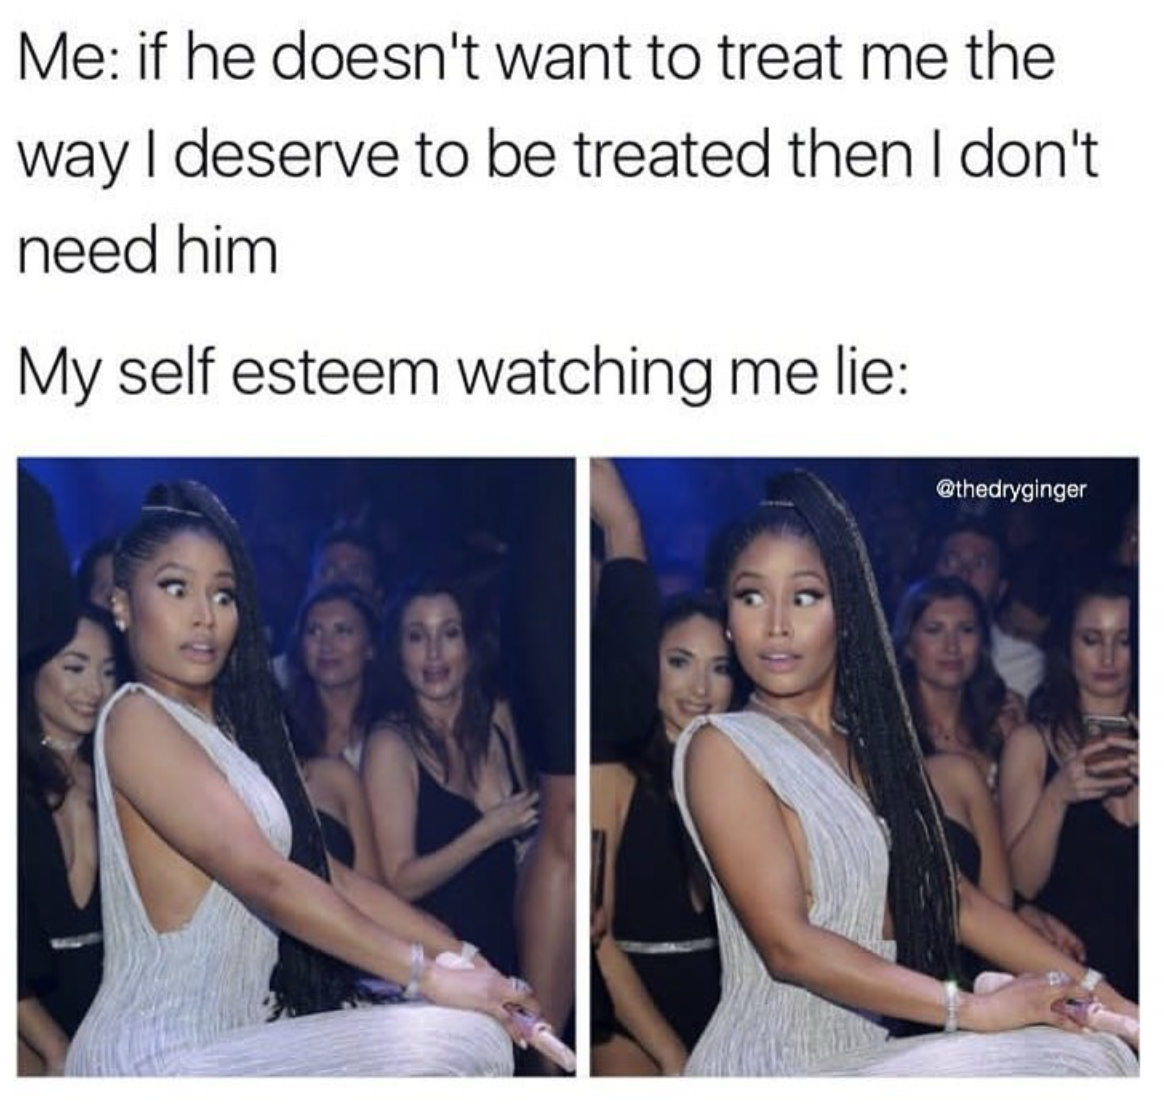 mental break memes - Me if he doesn't want to treat me the way I deserve to be treated then I don't need him My self esteem watching me lie